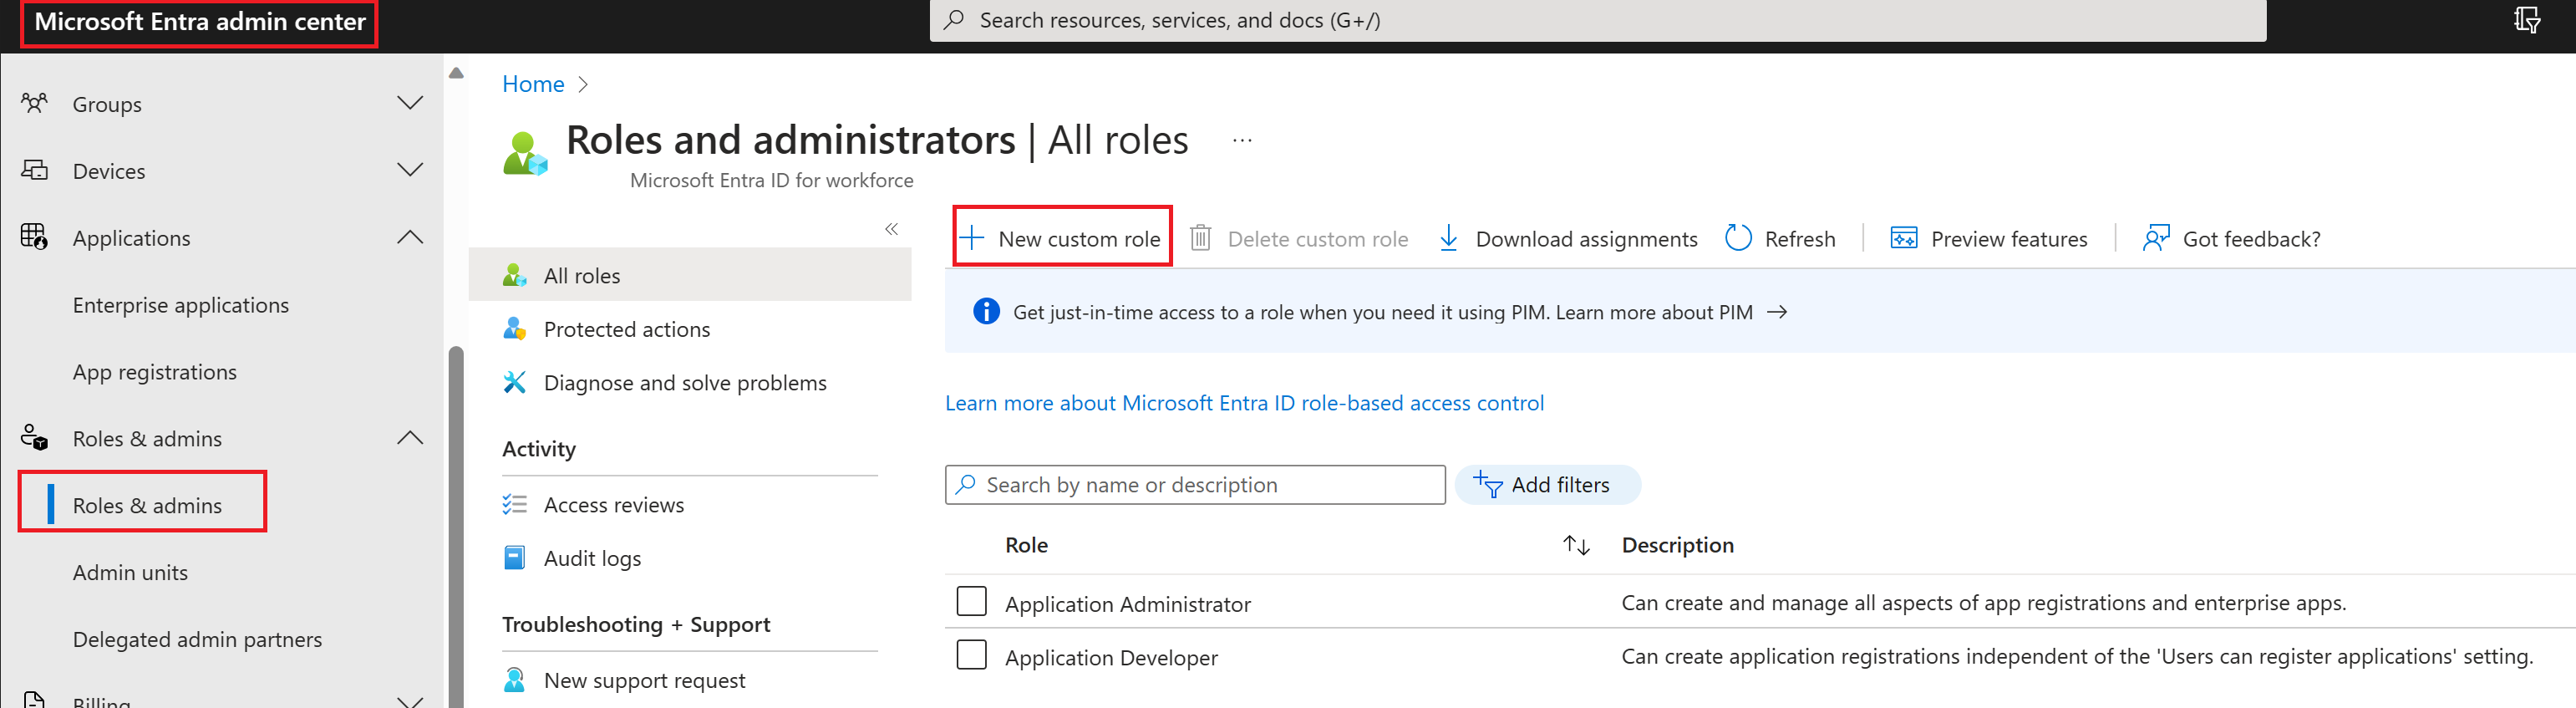 Screenshot of the Roles and administrators screen with the New custom role menu option highlighted.